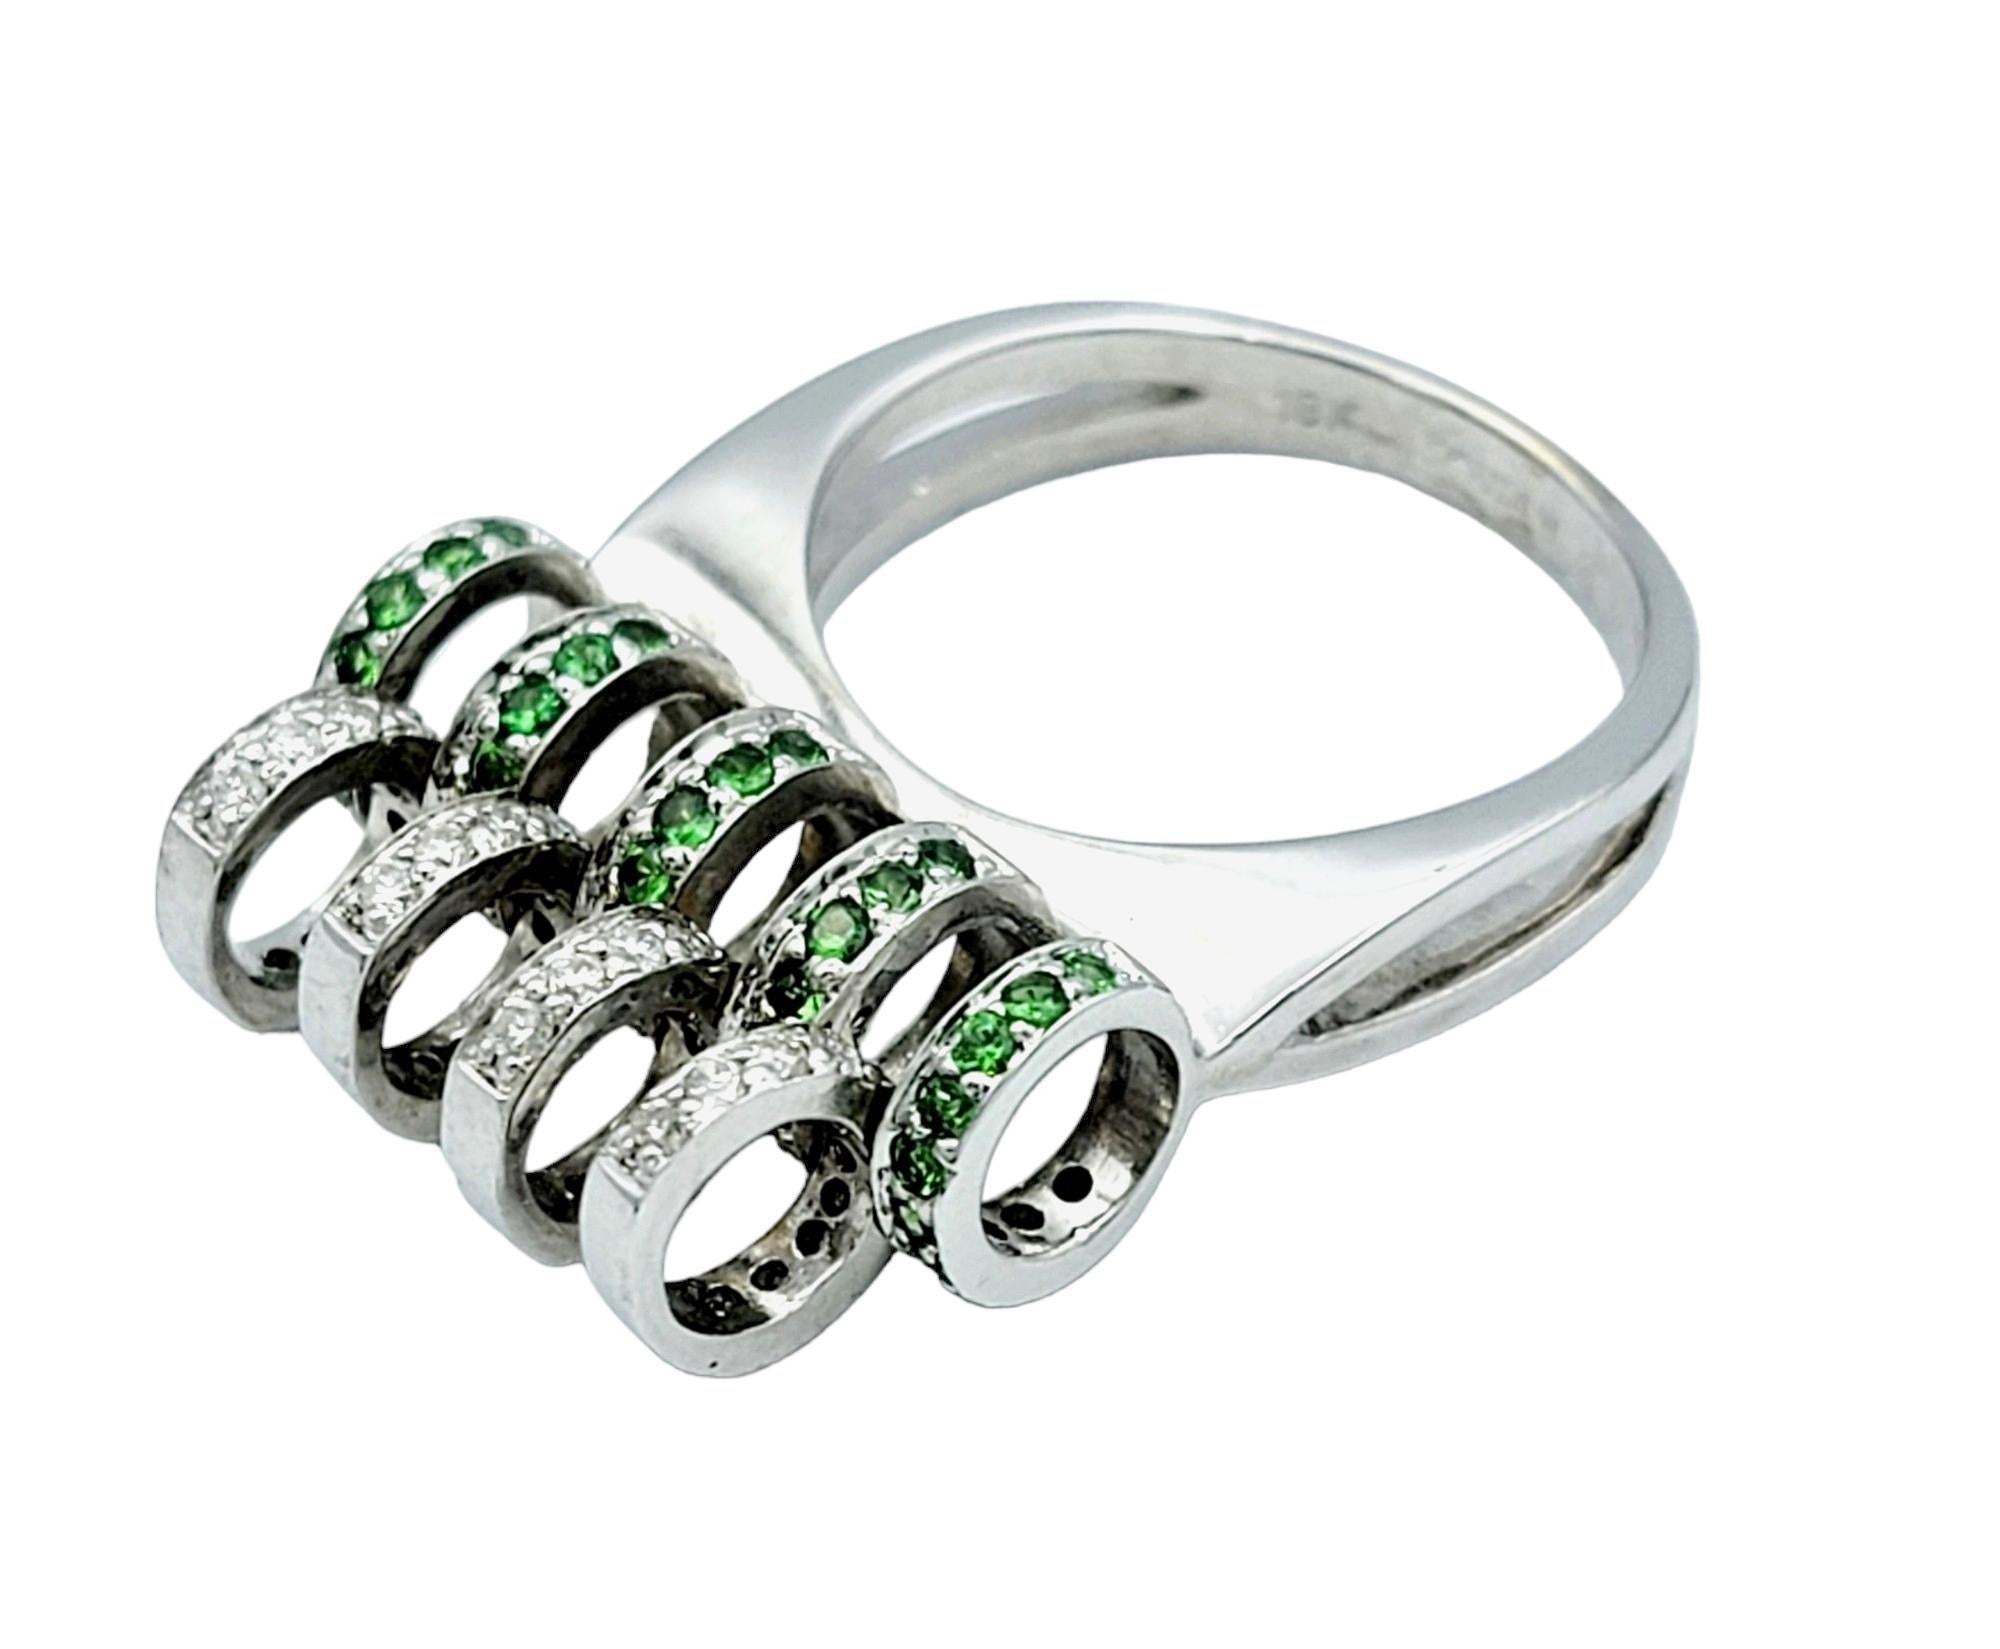 Sonia B. Designs Green Garnet and Diamond Spinning Disc Ring 18 Karat White Gold In Good Condition For Sale In Scottsdale, AZ